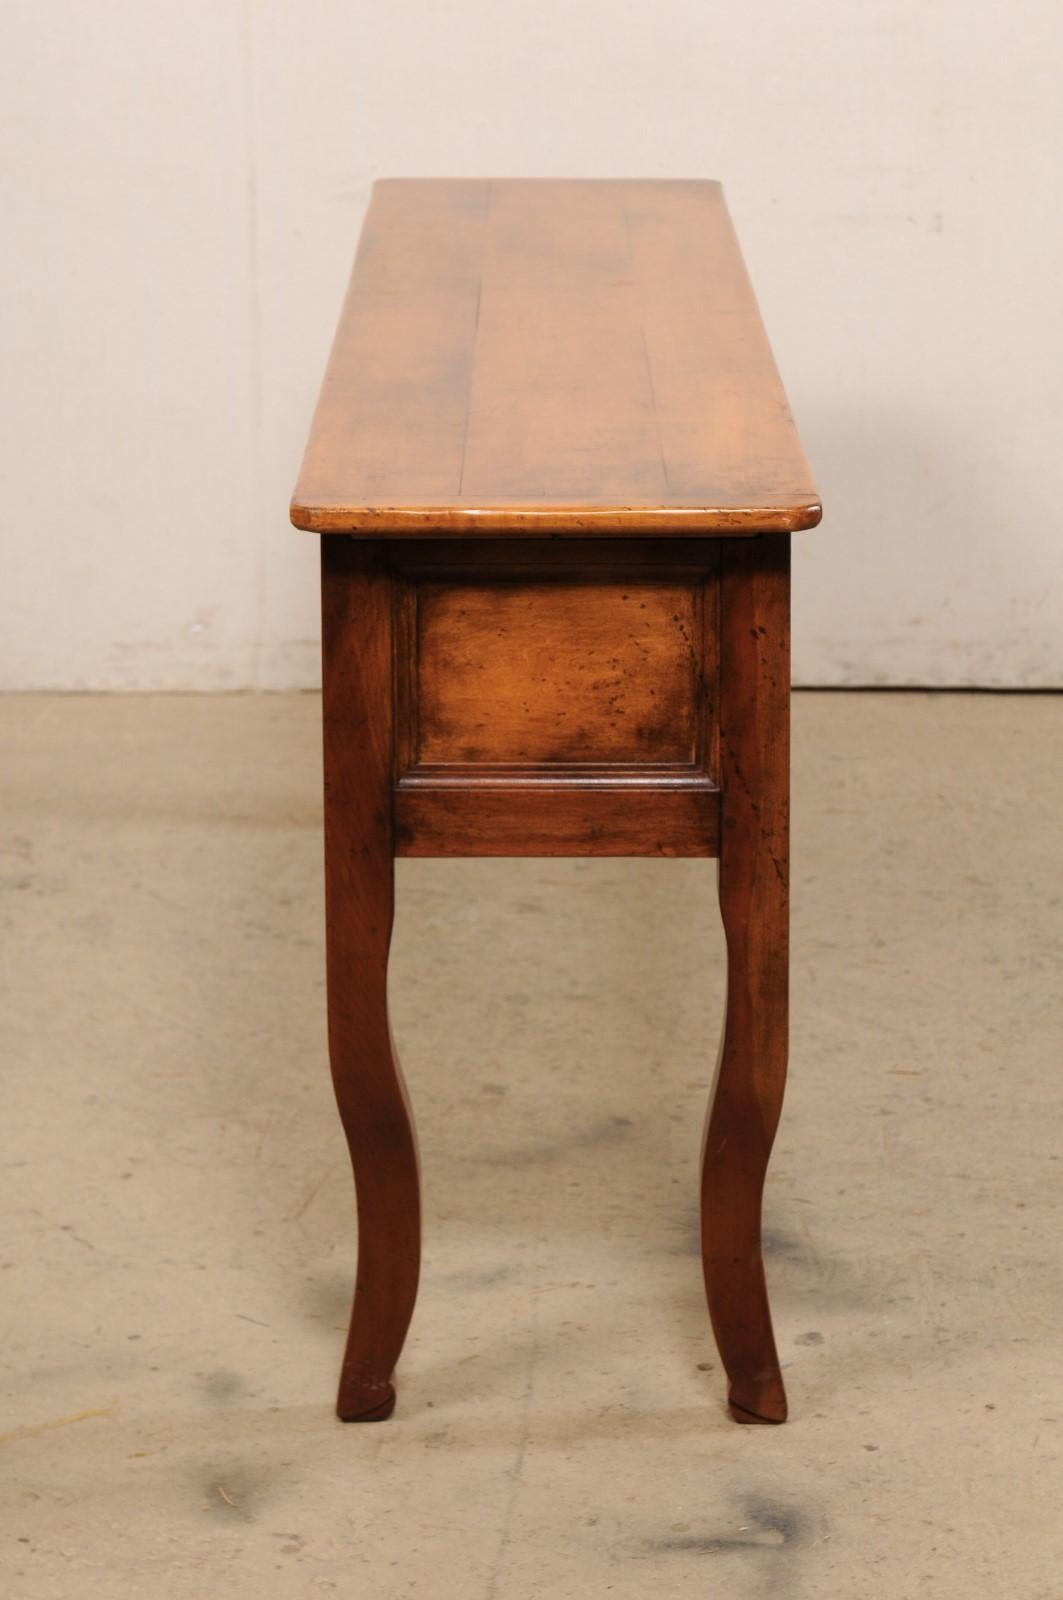 20th Century French Carved-Wood Server Table W/Drawers & Leaf / Shelf Extensions at Each Side For Sale